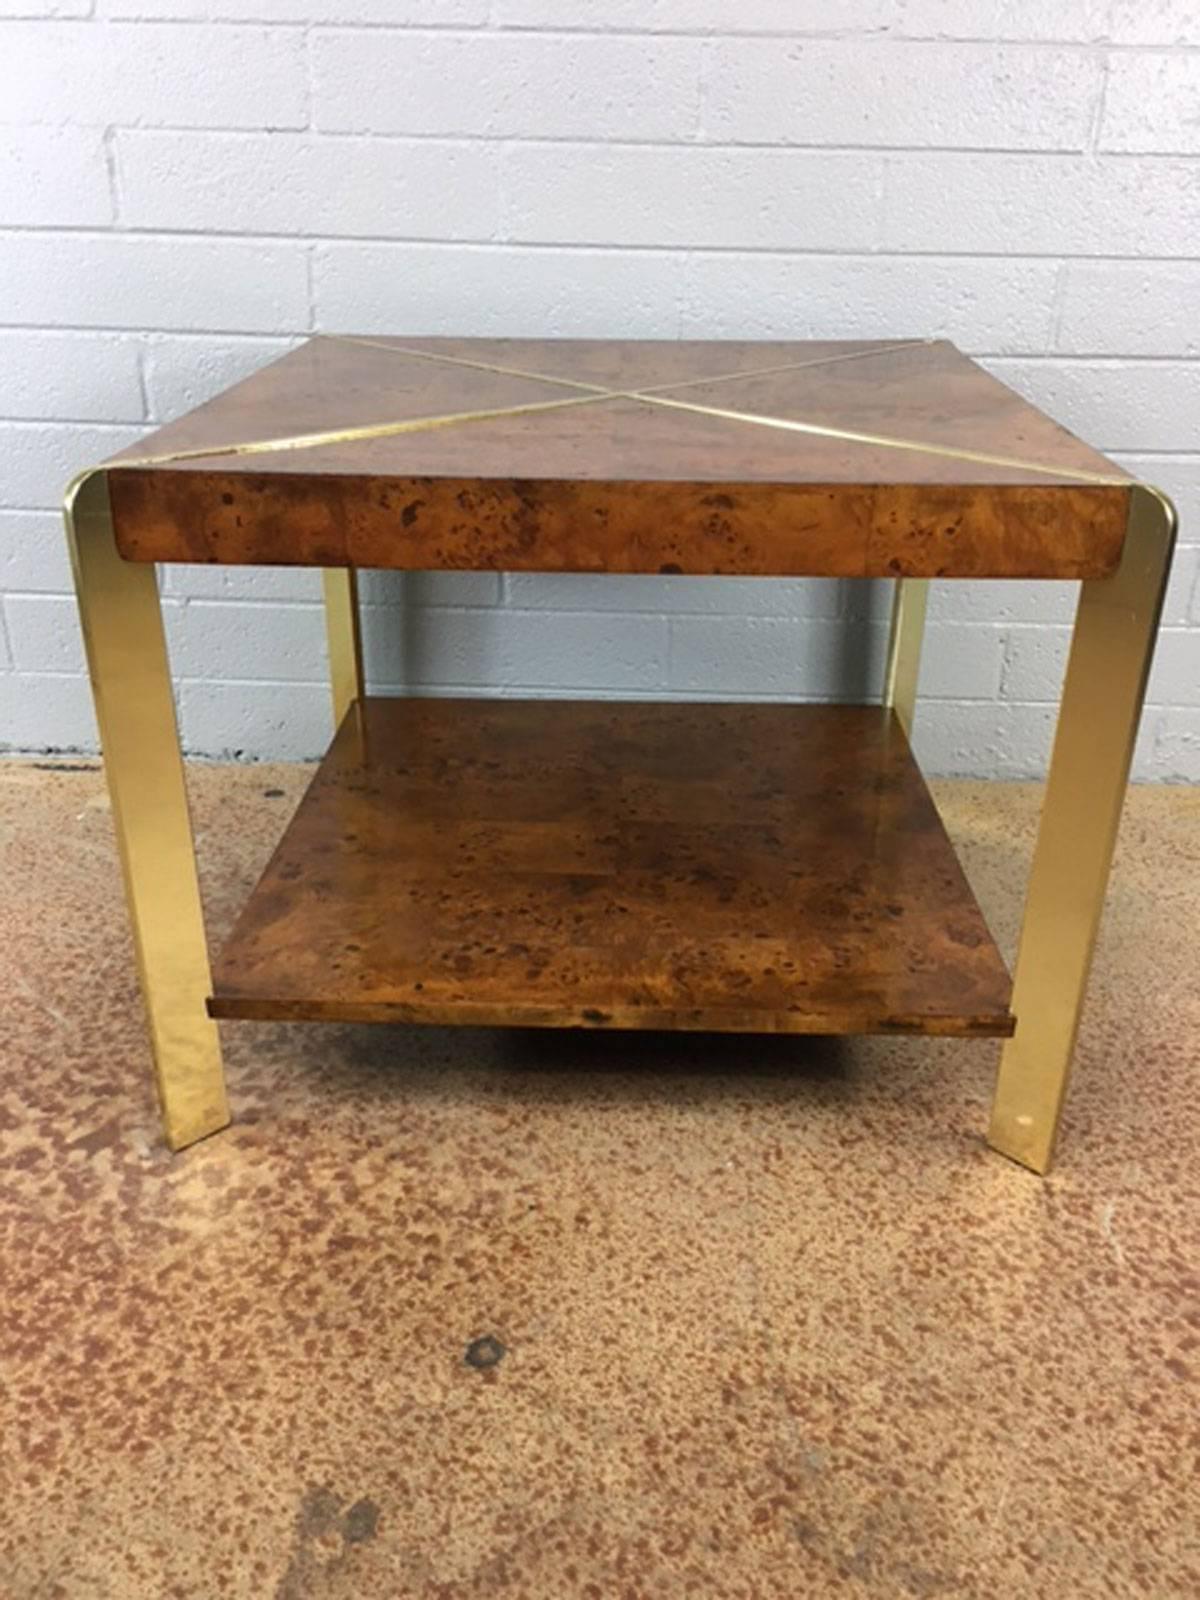 Burl wood and brass two tiered side table or coffee table by Milo Baughman in burl wood. Unique and stunning. Very nice condition.